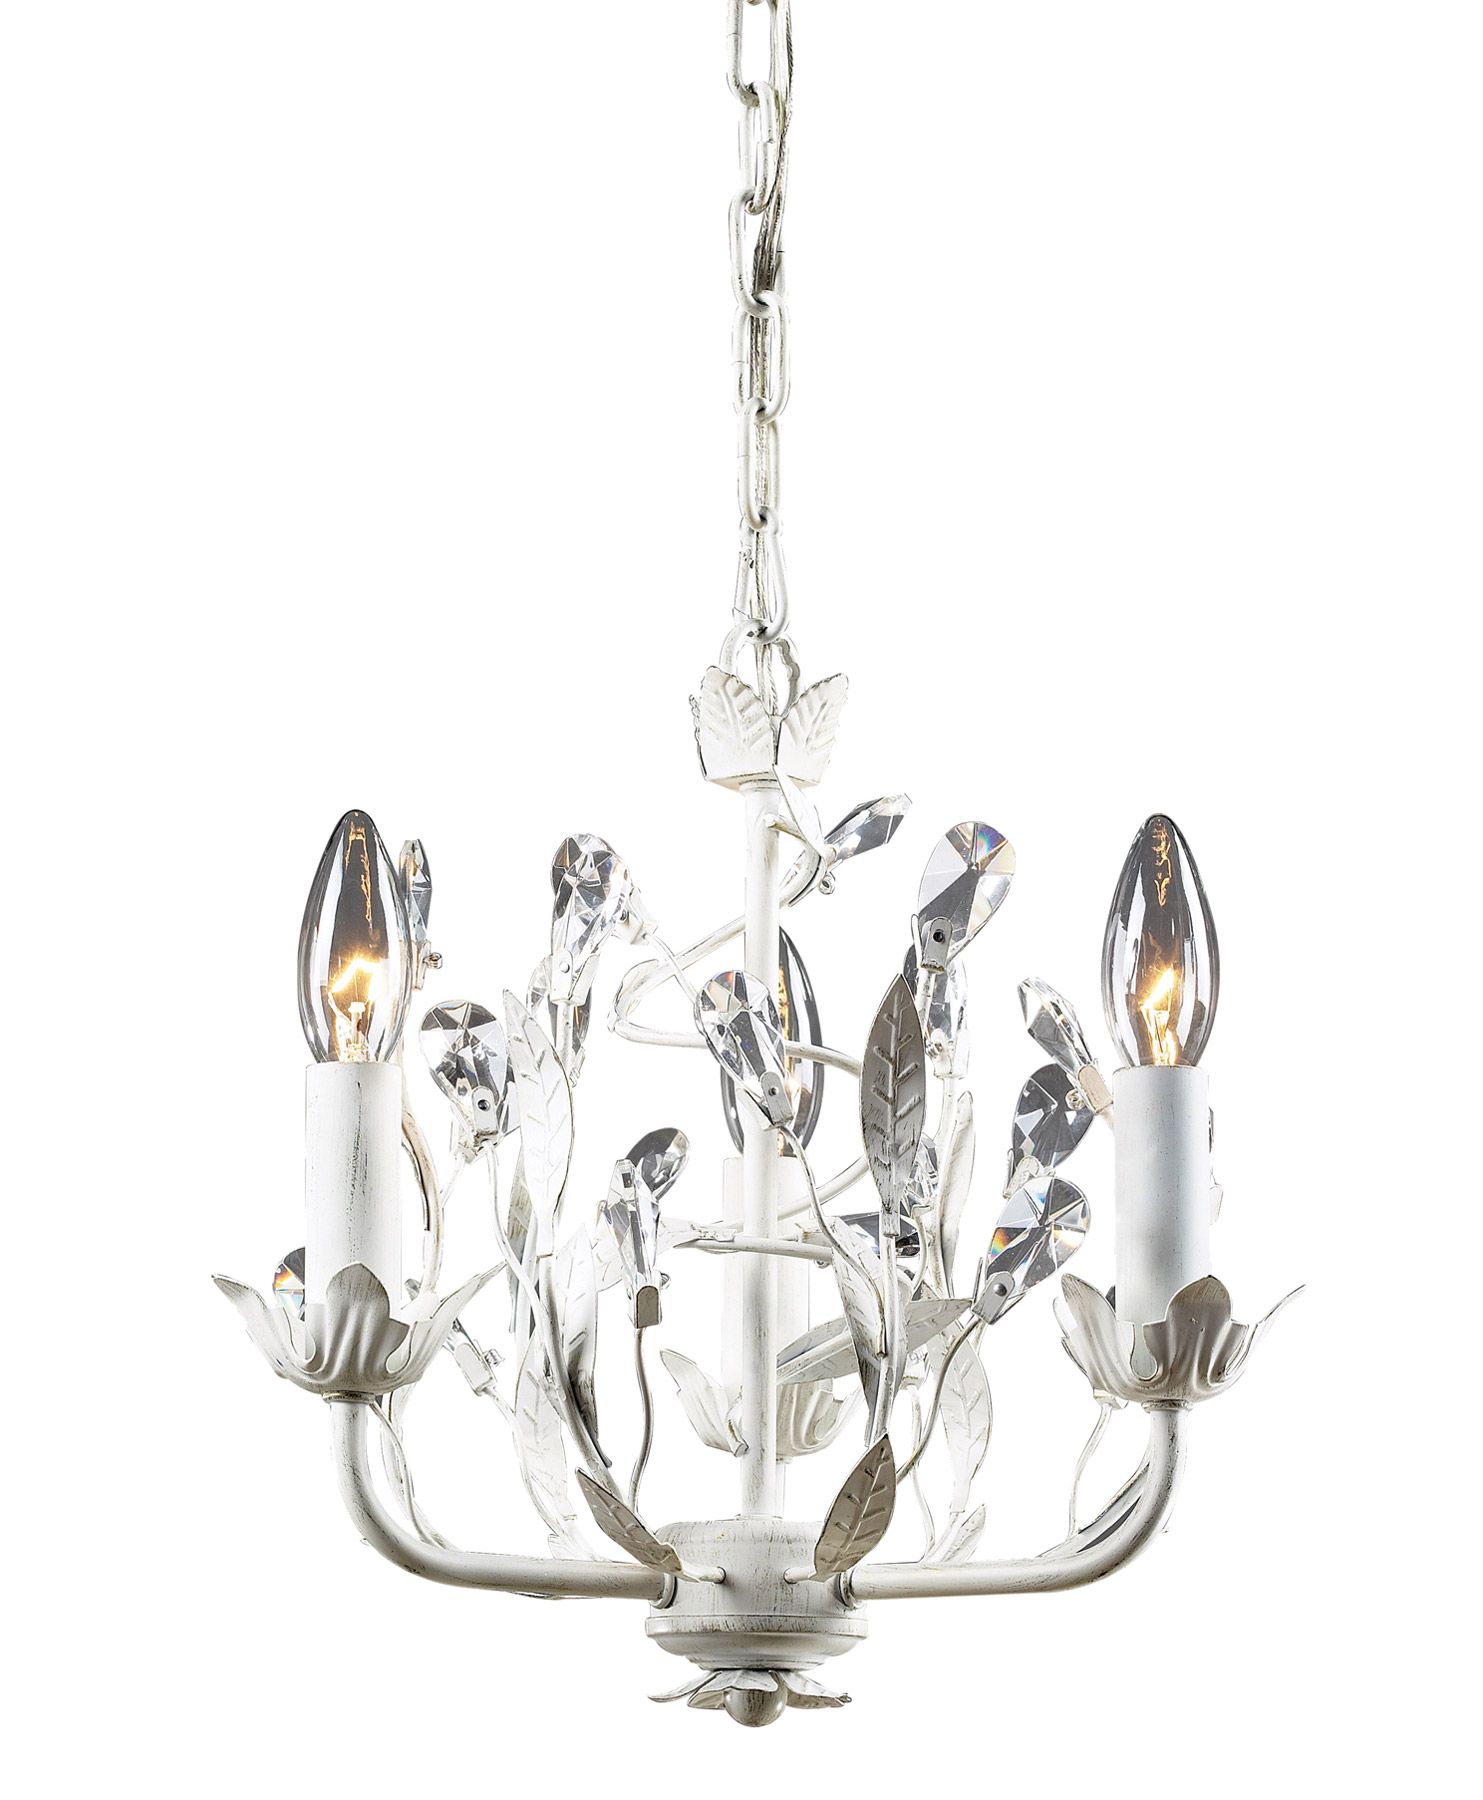 Elk Lighting 18112/3 Circeo Crystal Mini Chandelier Pertaining To Walnut And Crystal Small Mini Chandeliers (View 2 of 15)